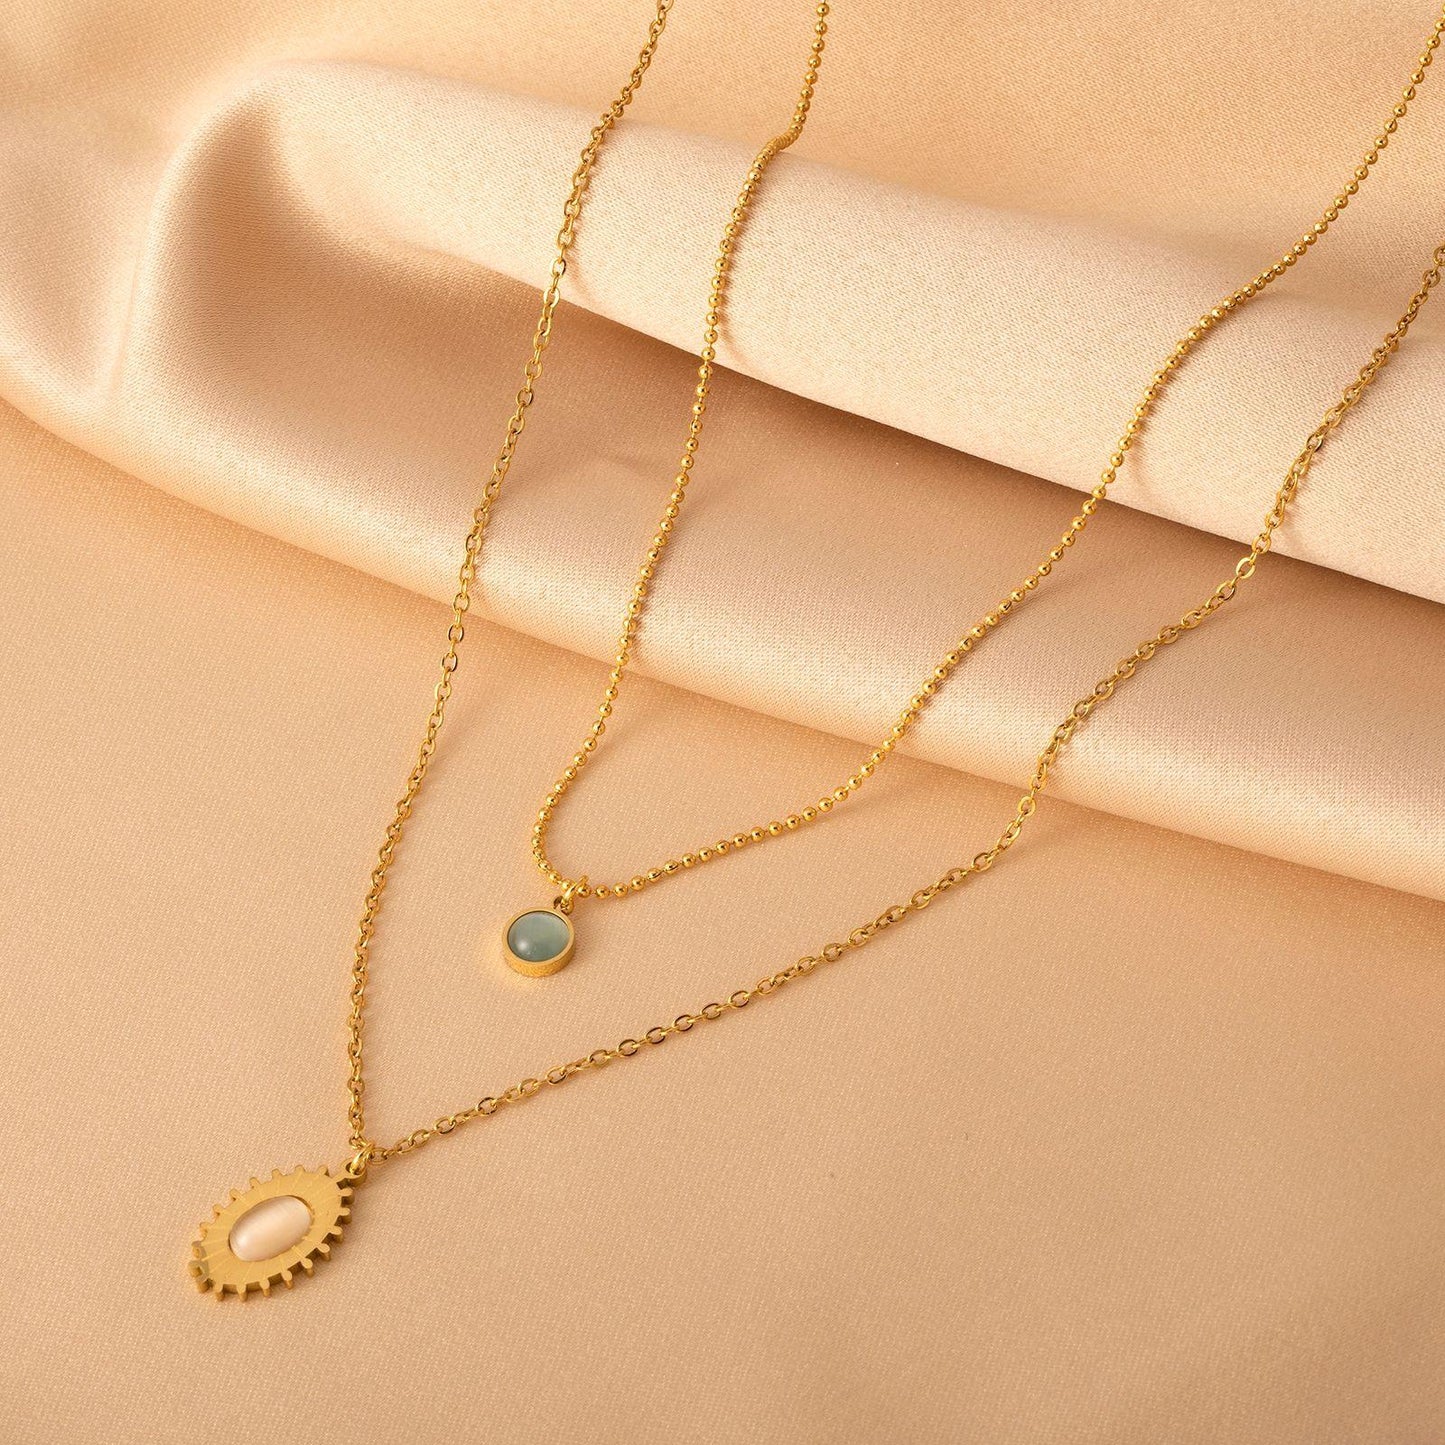 Non-fading oval pendant double layer necklace